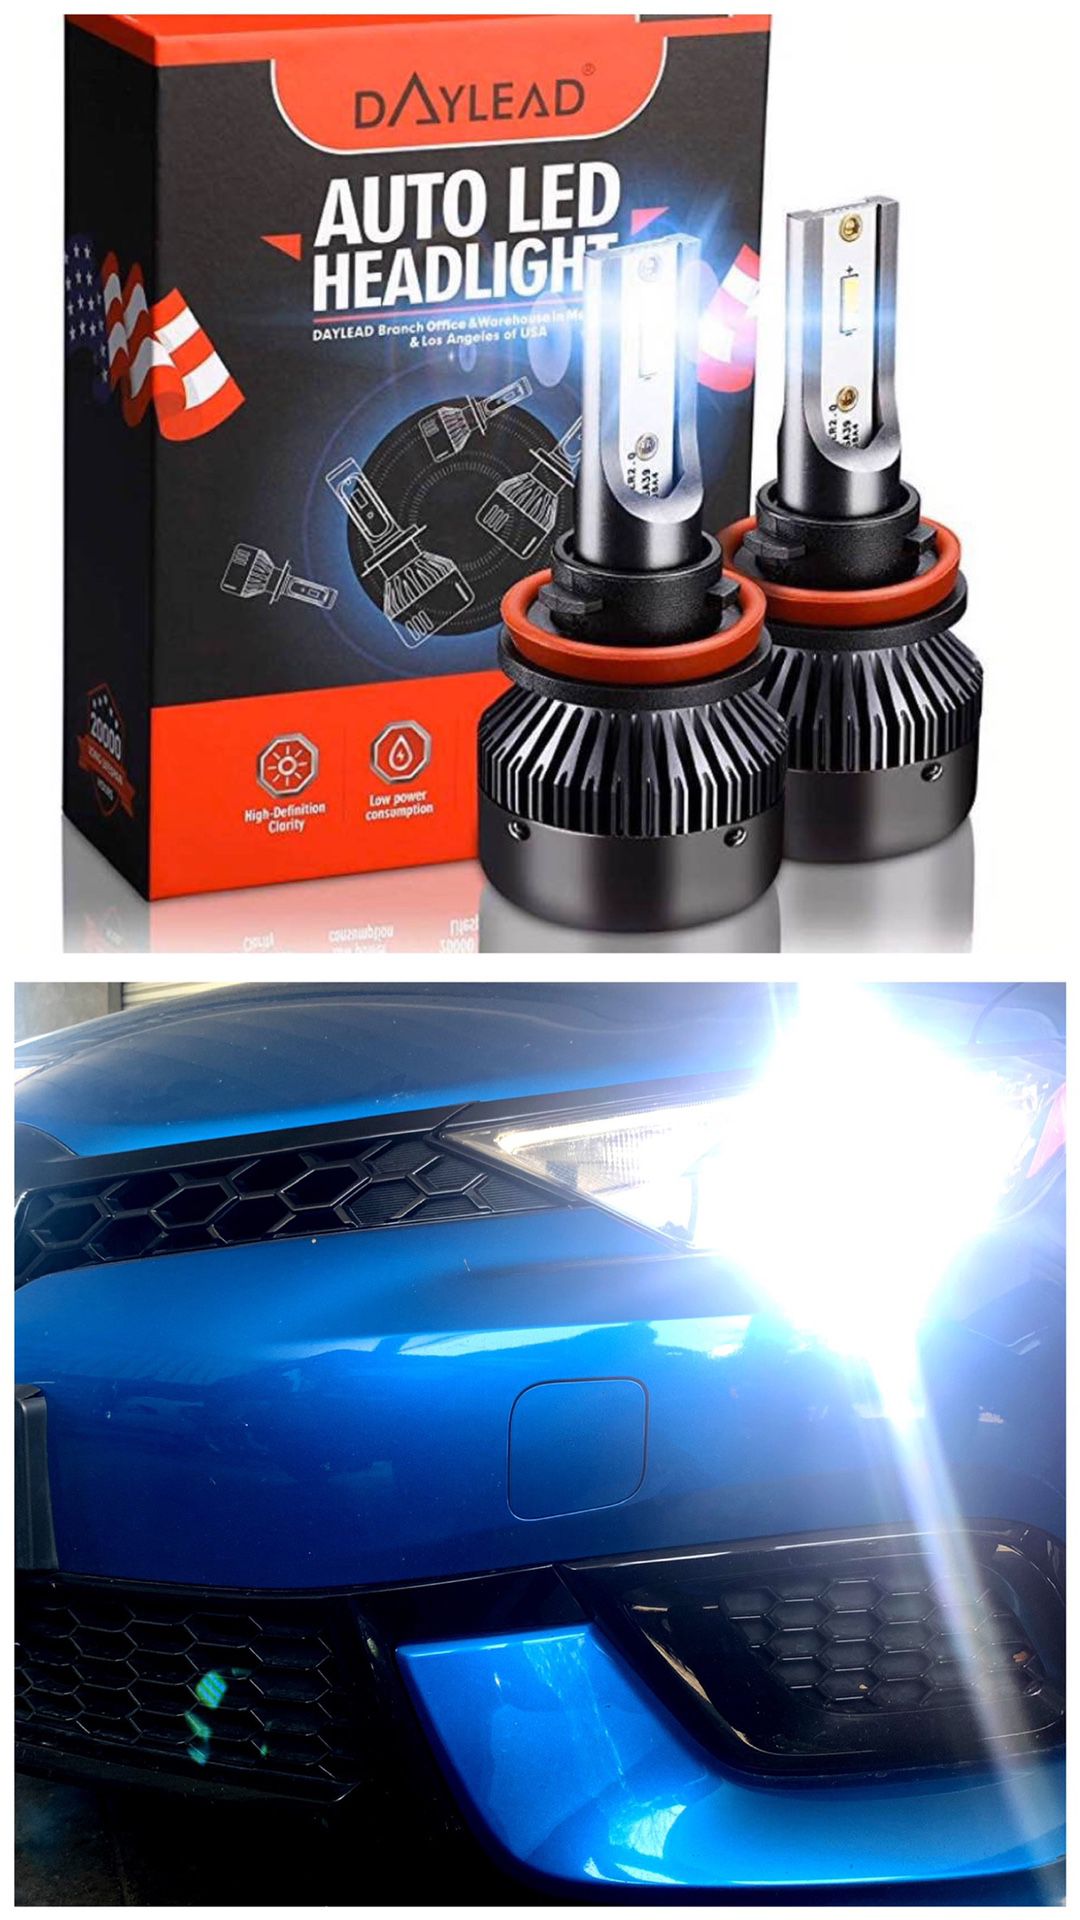 SUNDAY OPEN Brightest LED headlights or fog lights for ANY car $25 & FREE license plate led